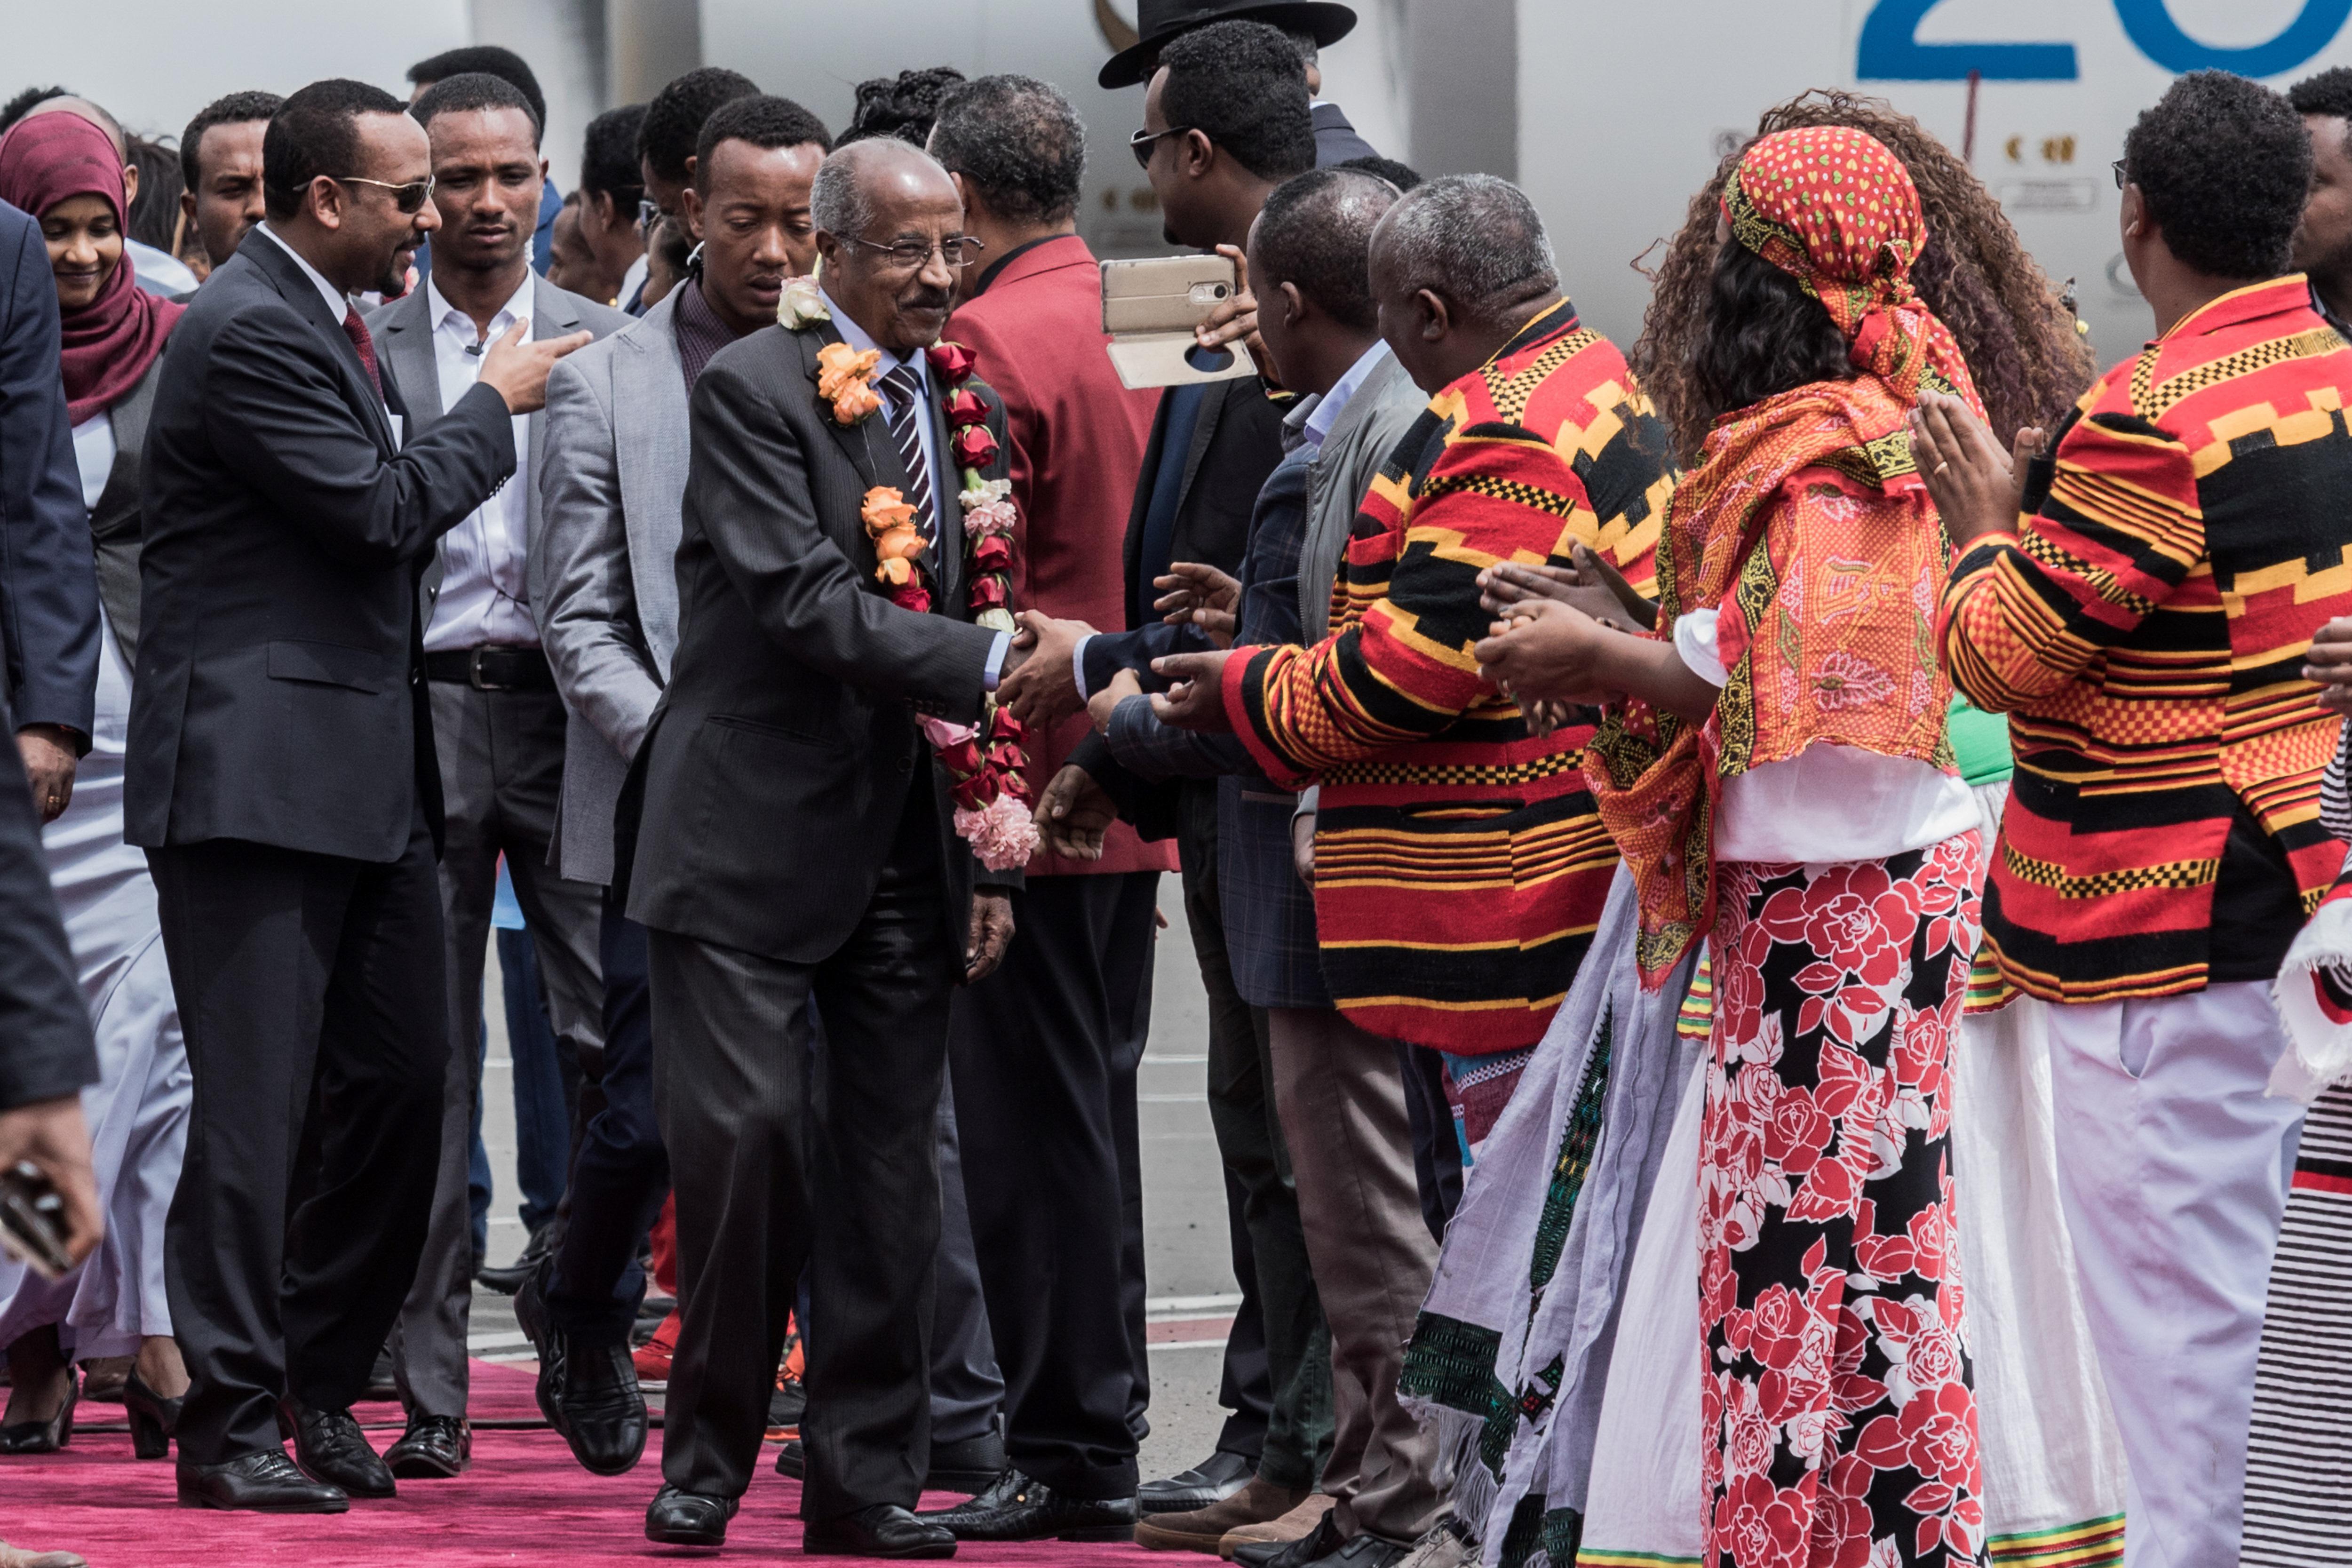 Eritrean Foreign Minister Osman Saleh Mohammed walks with Ethiopian Prime Minister Abiy Ahmed as an Eritrean delegation for peace talks with Ethiopia arrives in Addis Ababa.